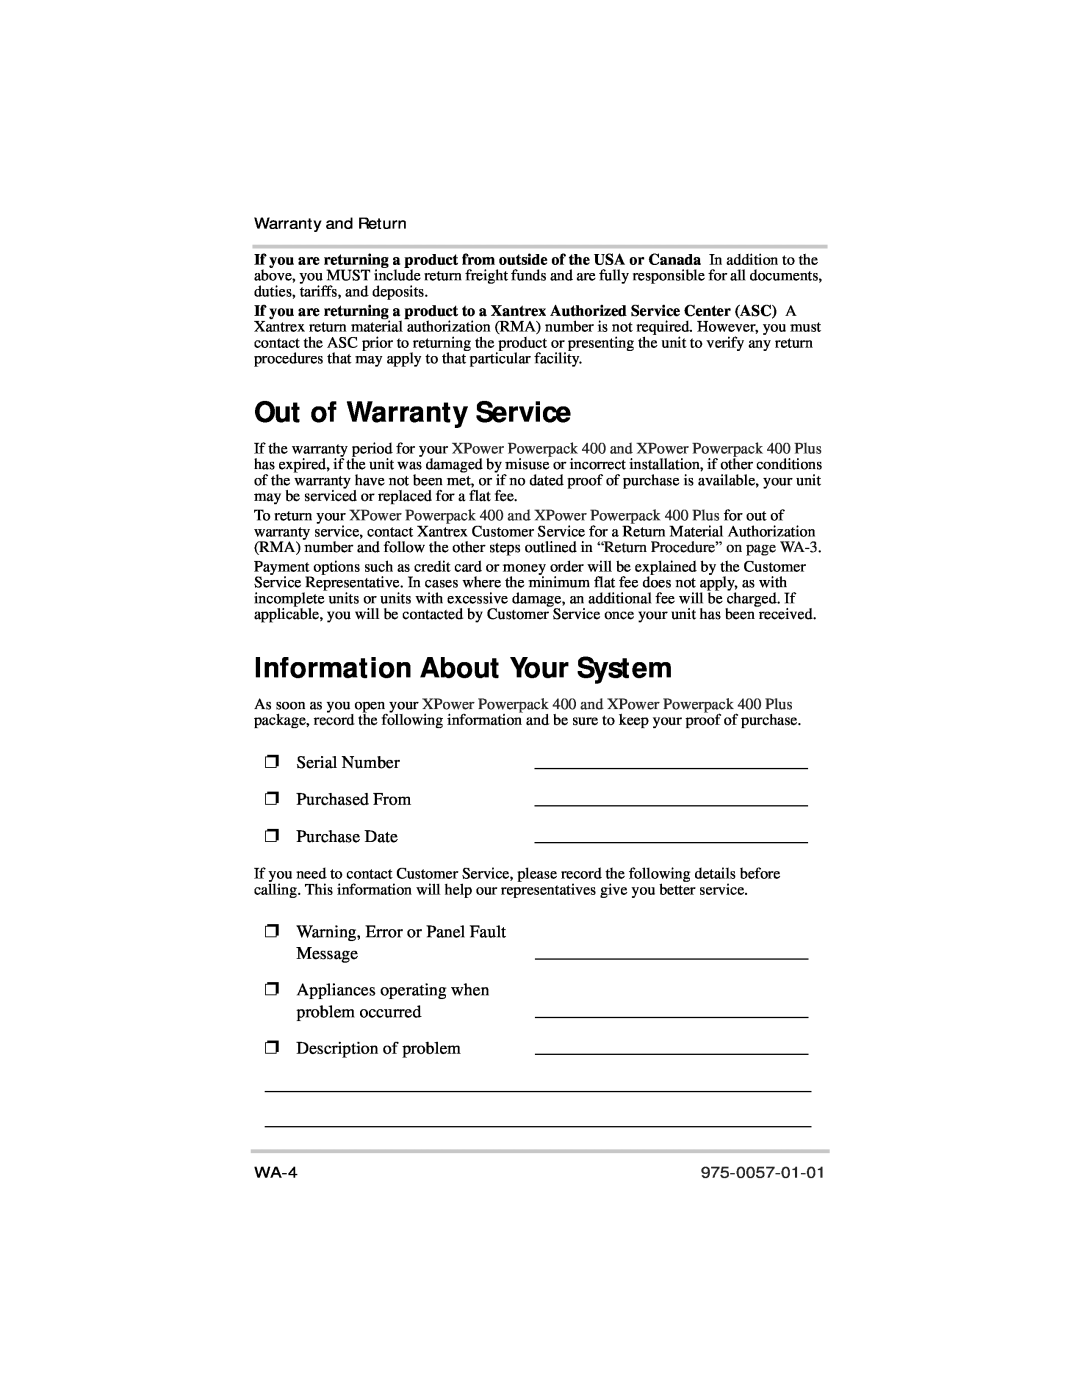 Xantrex Technology 975-0057-01-01 Out of Warranty Service, Information About Your System, Warranty and Return, WA-4 